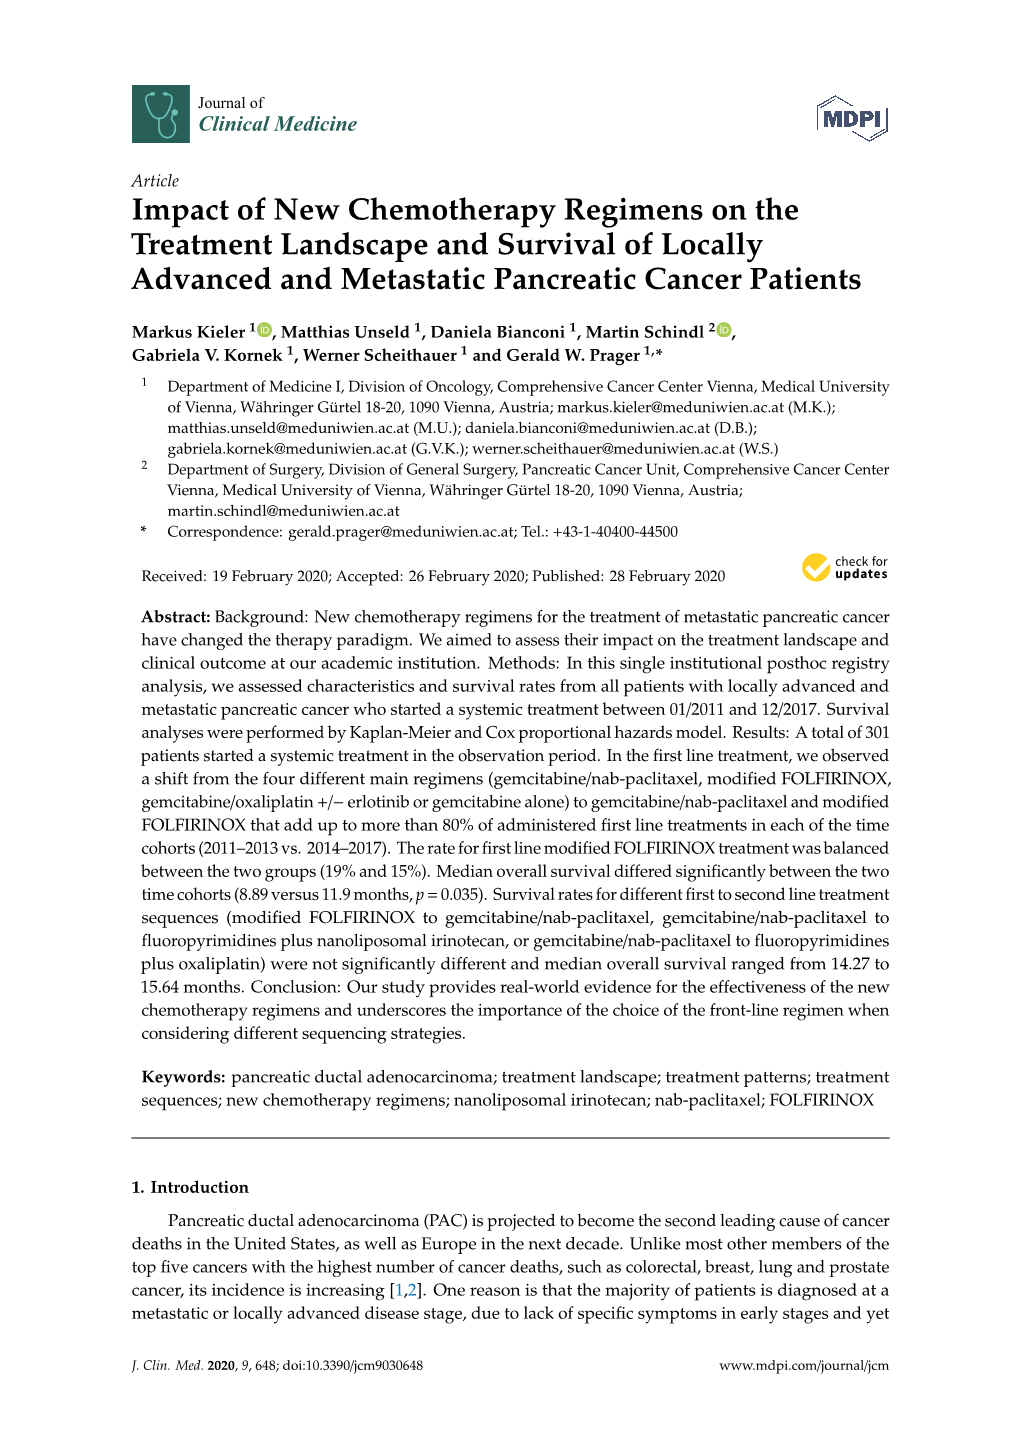 Impact of New Chemotherapy Regimens on the Treatment Landscape and Survival of Locally Advanced and Metastatic Pancreatic Cancer Patients